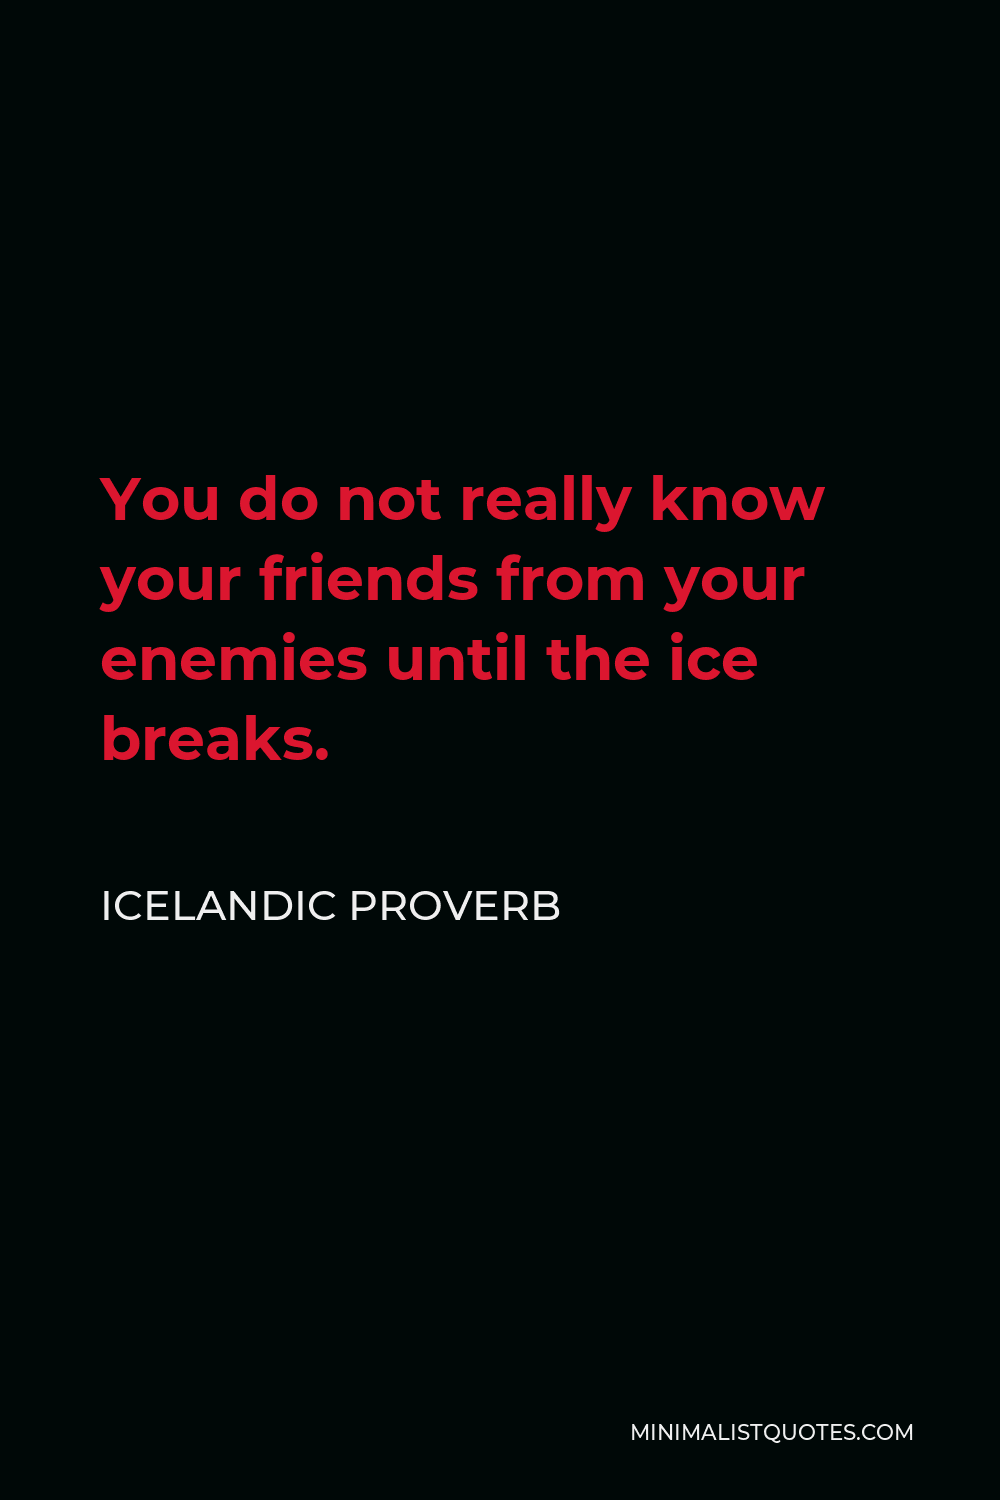 Icelandic Proverb Quote - You do not really know your friends from your enemies until the ice breaks.